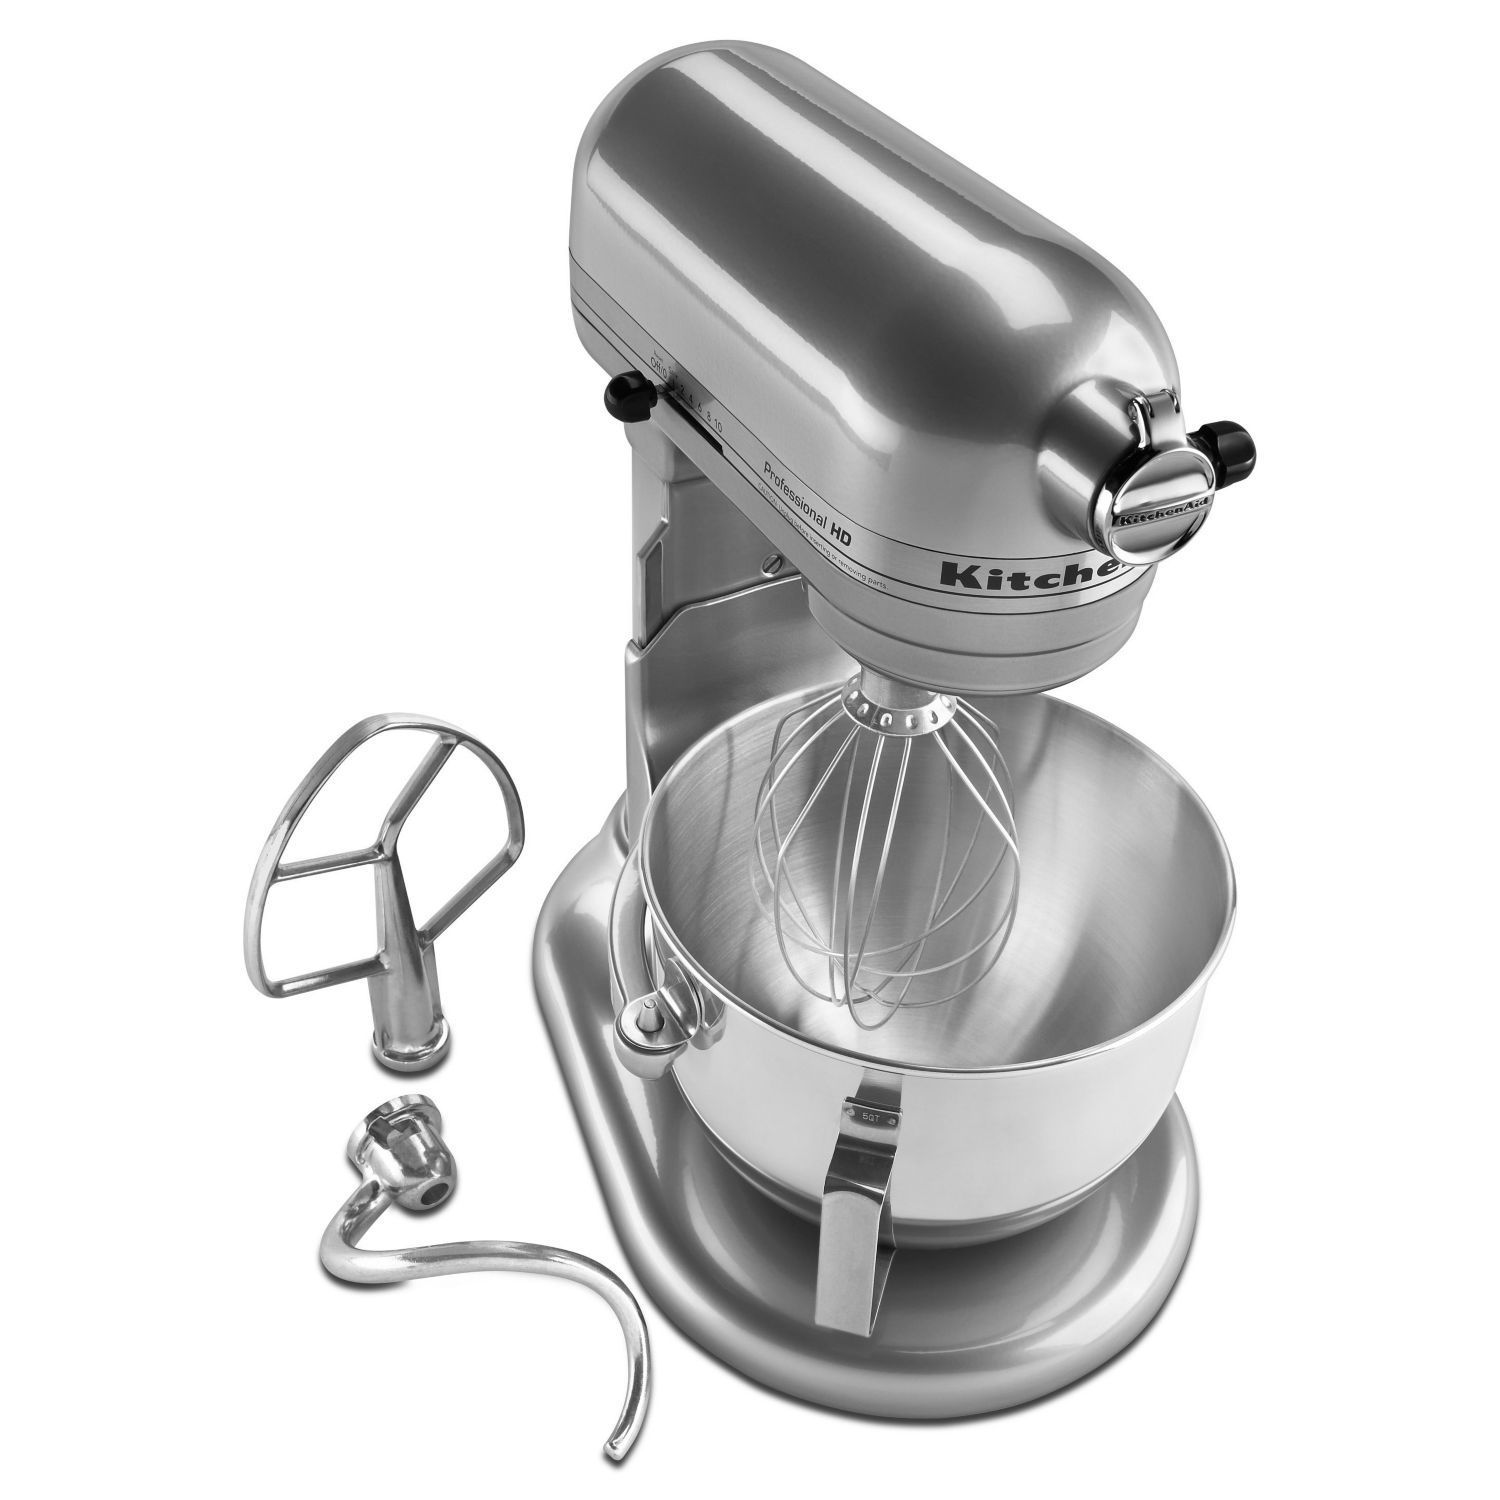 KitchenAid Professional Heavy-Duty Stand Mixer in Chrome